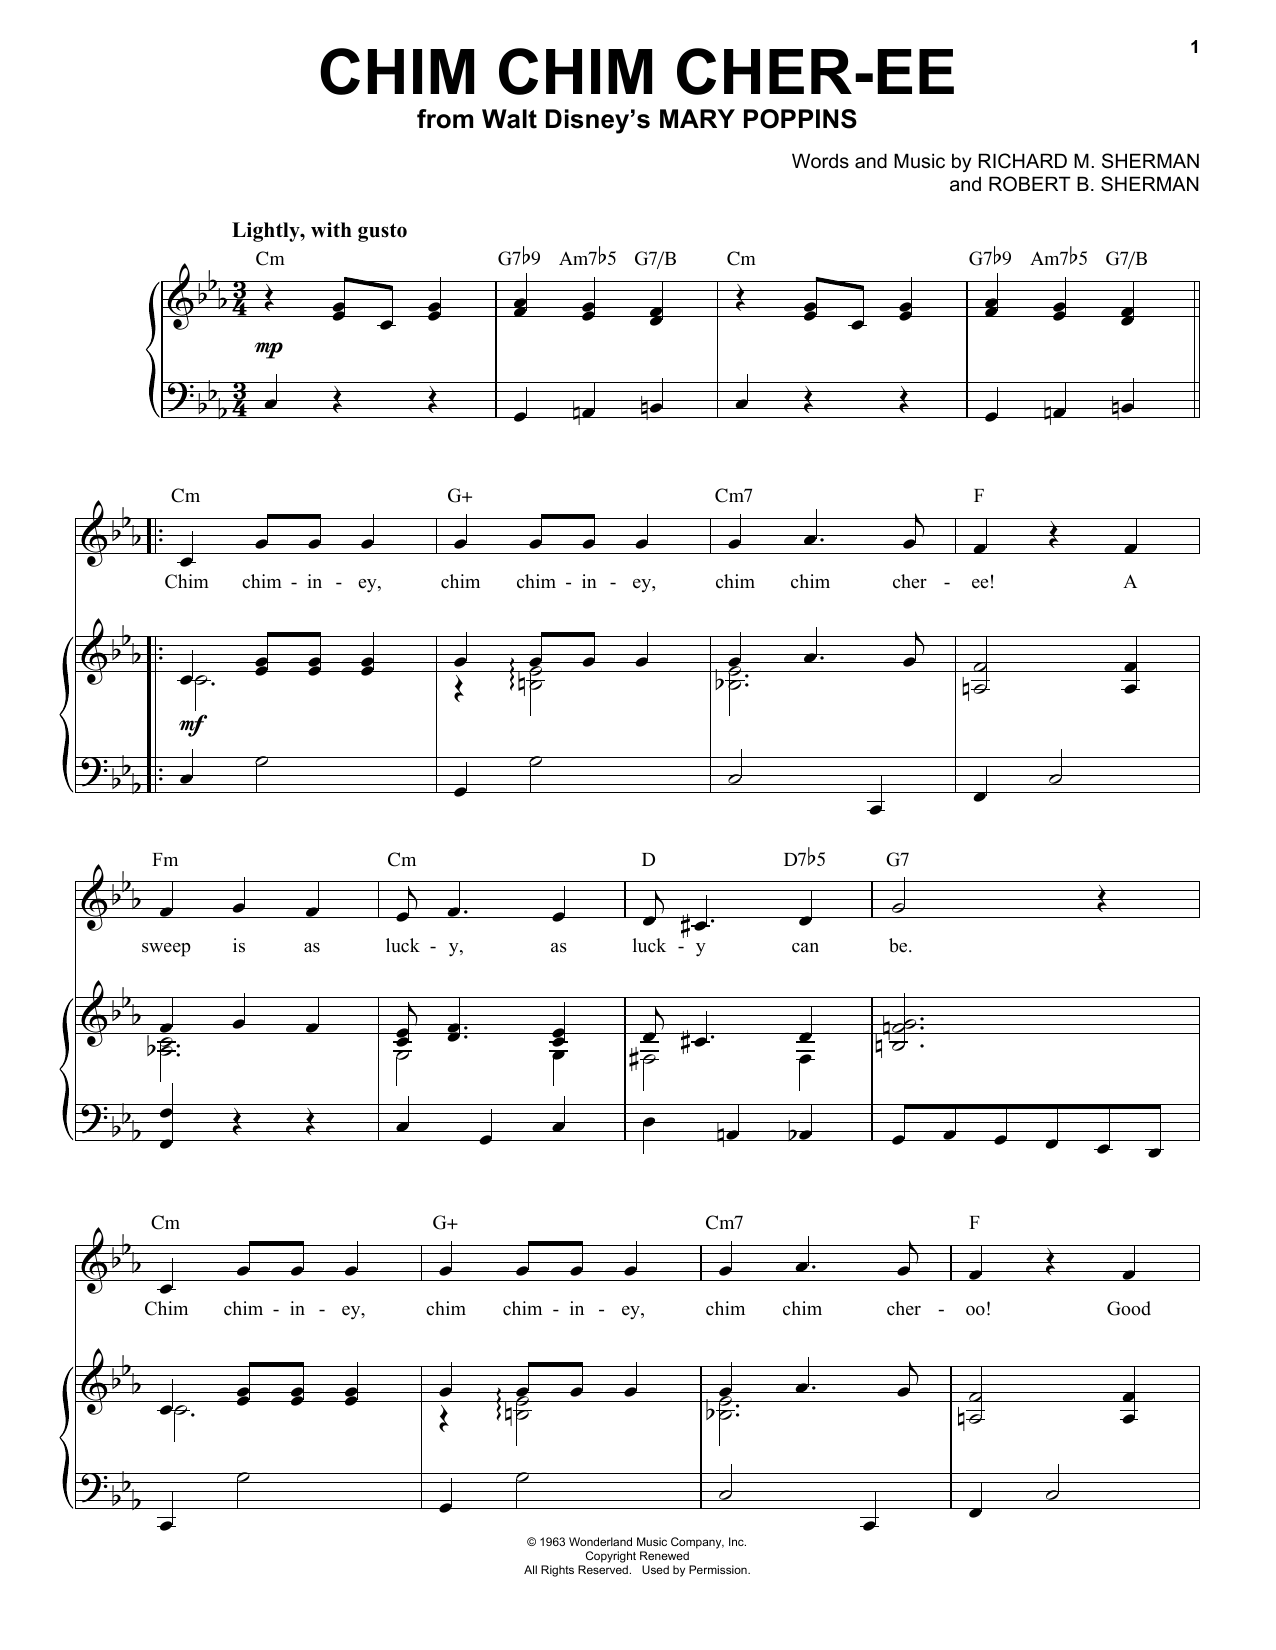 Chim Chim Cher-ee (from Mary Poppins) sheet music